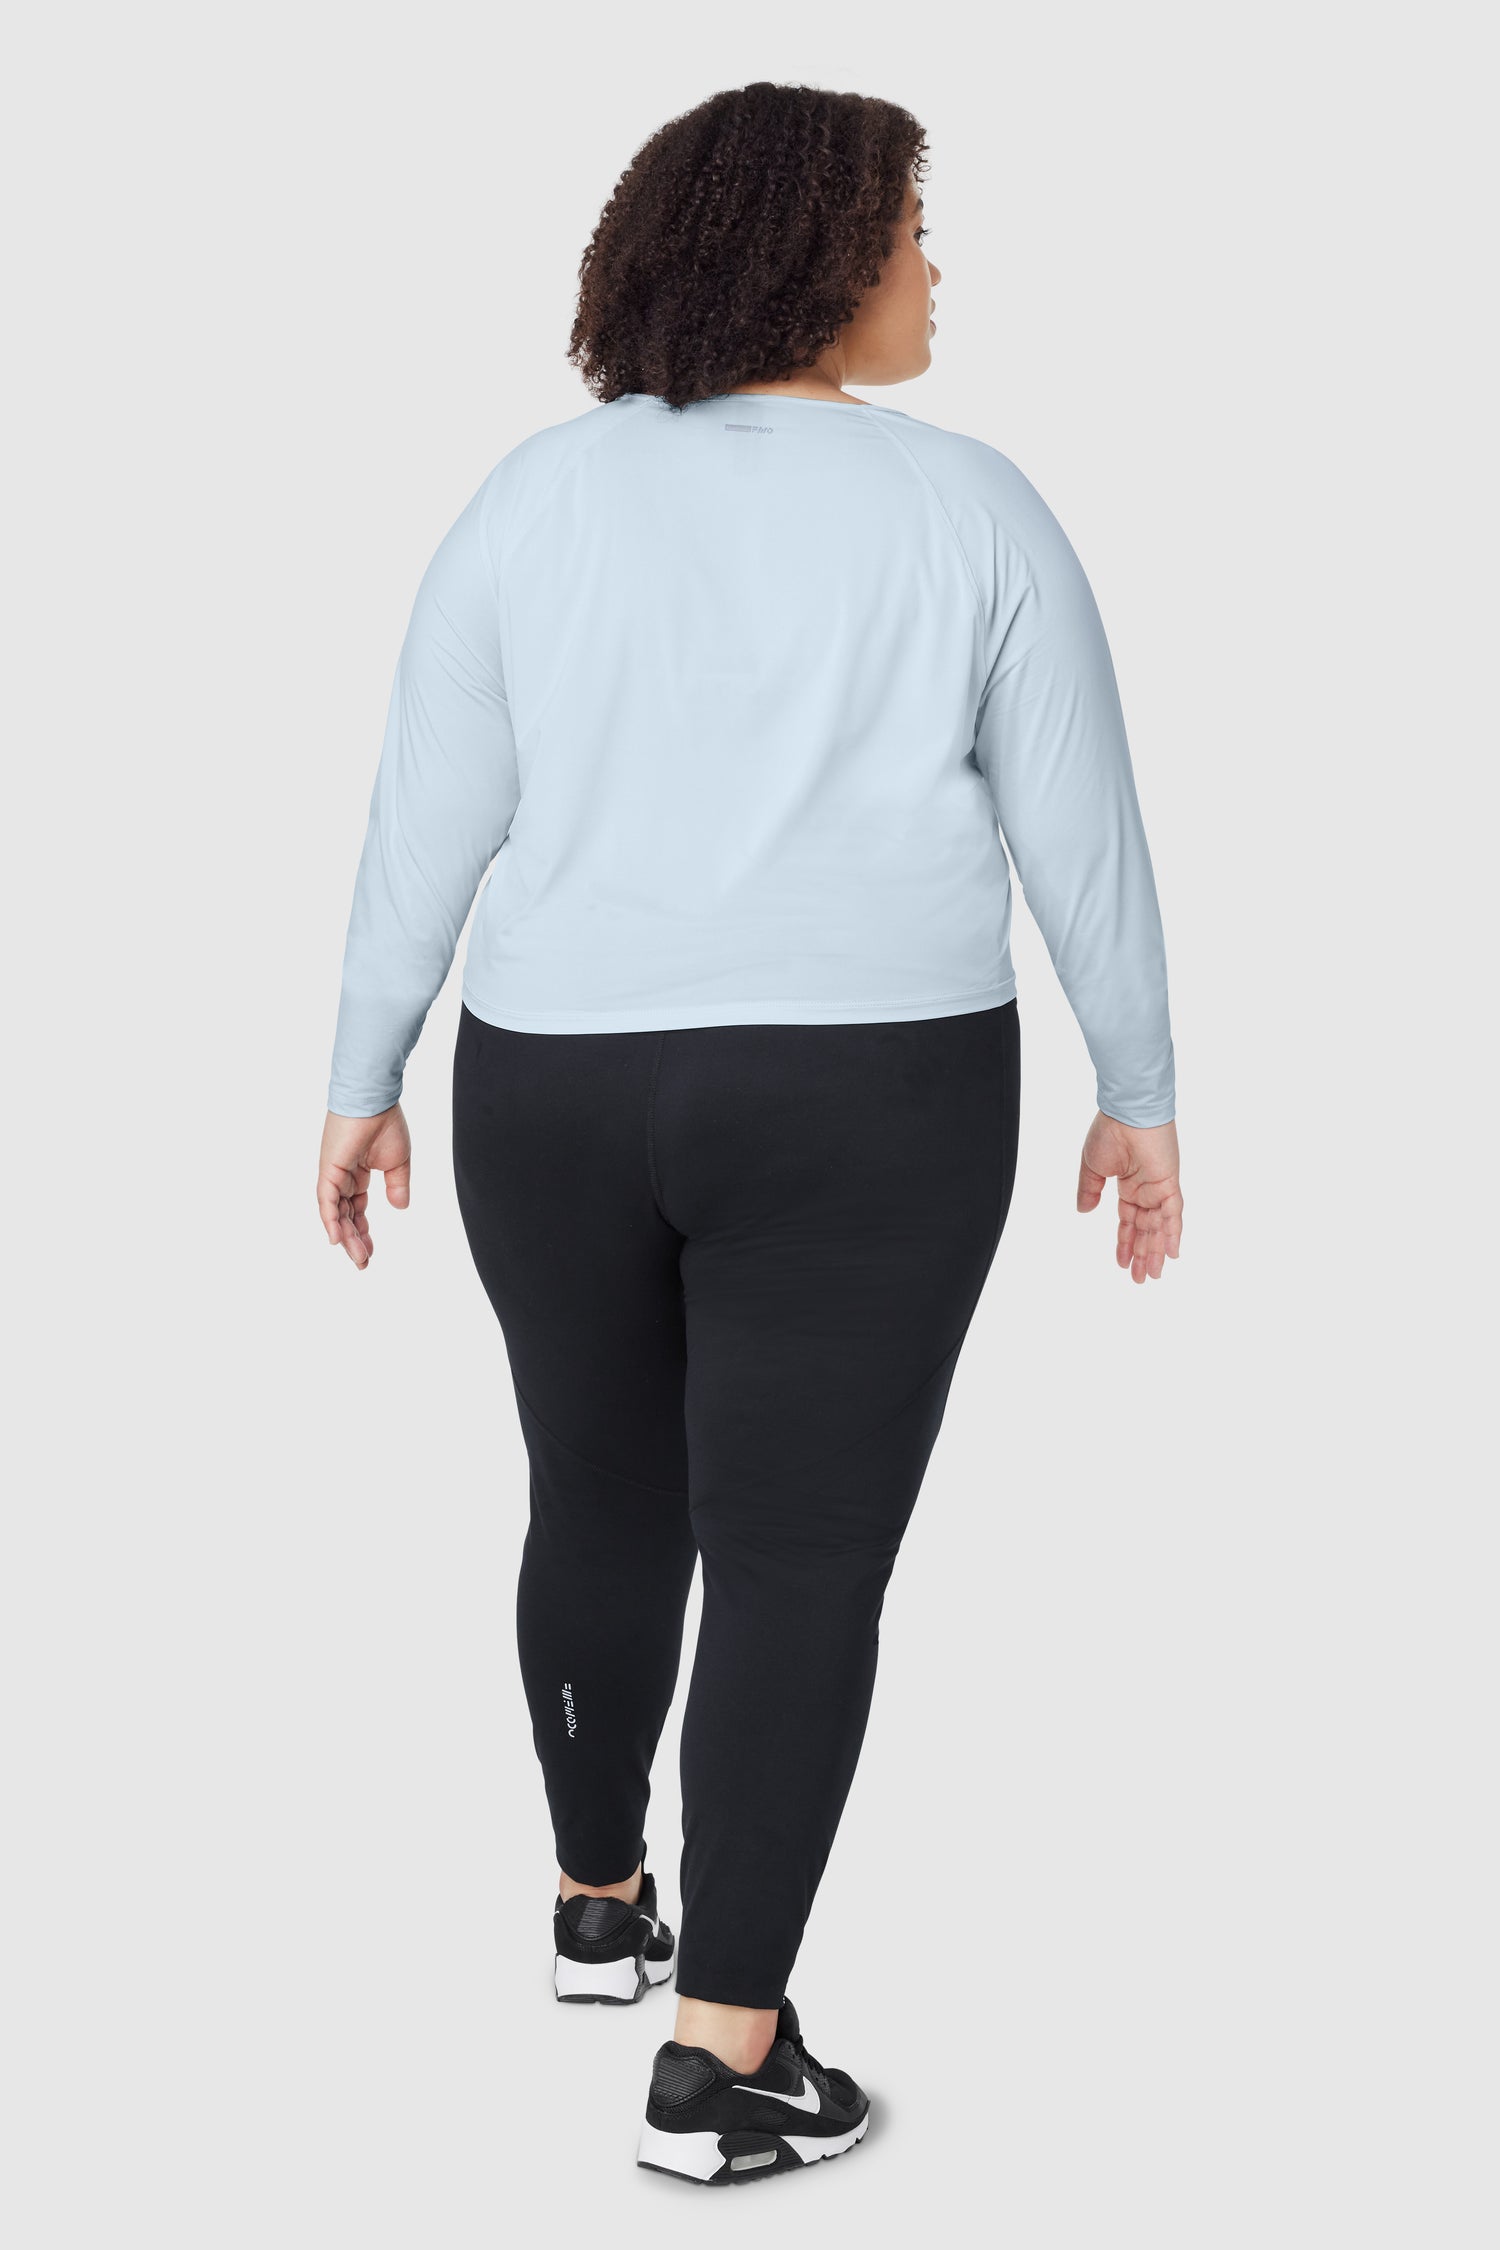 Push FWD Women's Butter Layer LS Top - BEST SELLING